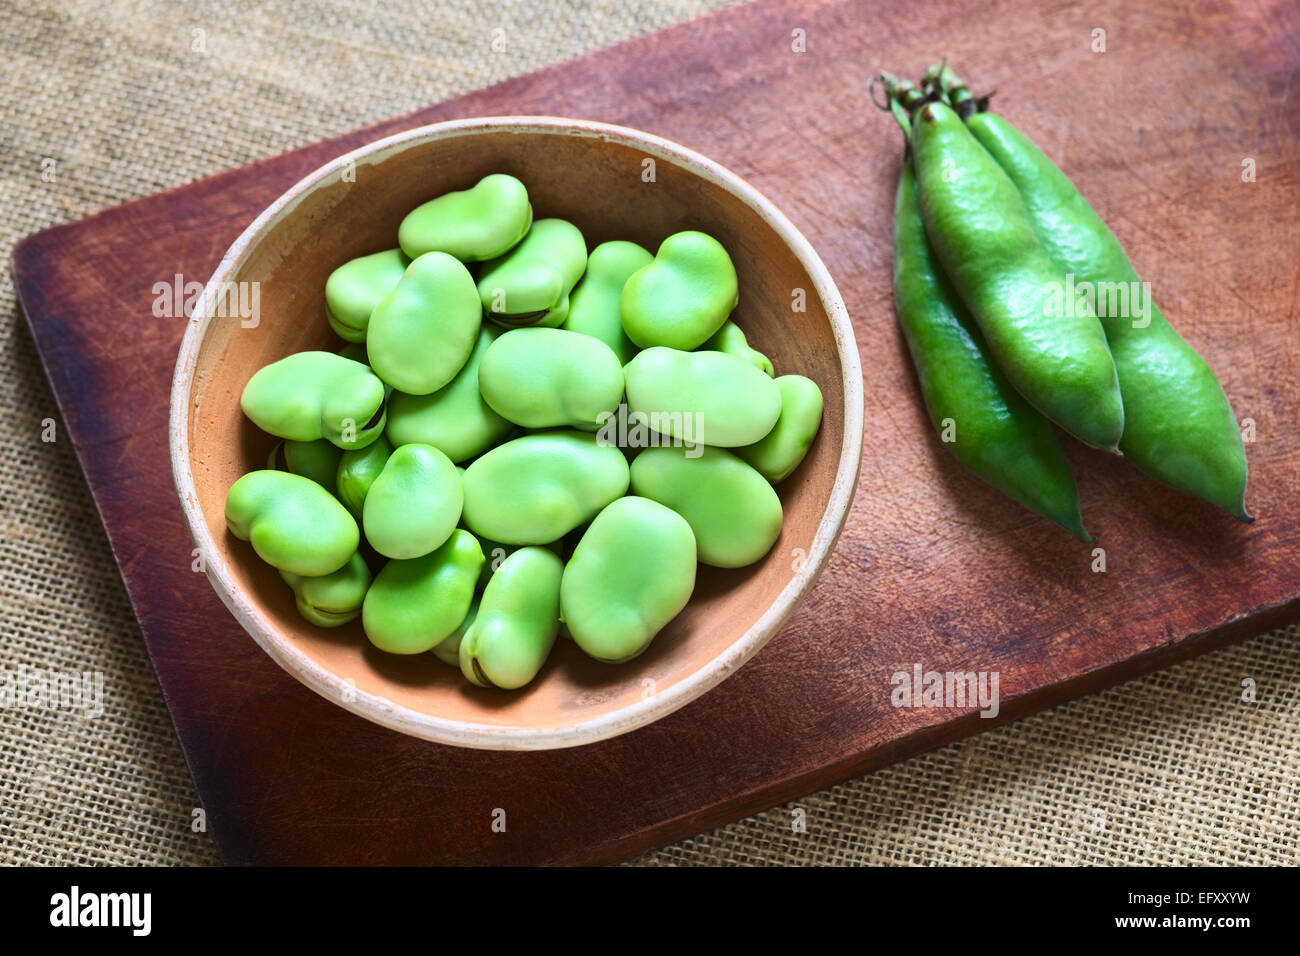 Raw broad beans (lat. Vicia faba) in bowl with pods on the side, photographed with natural light (Selective Focus) Stock Photo